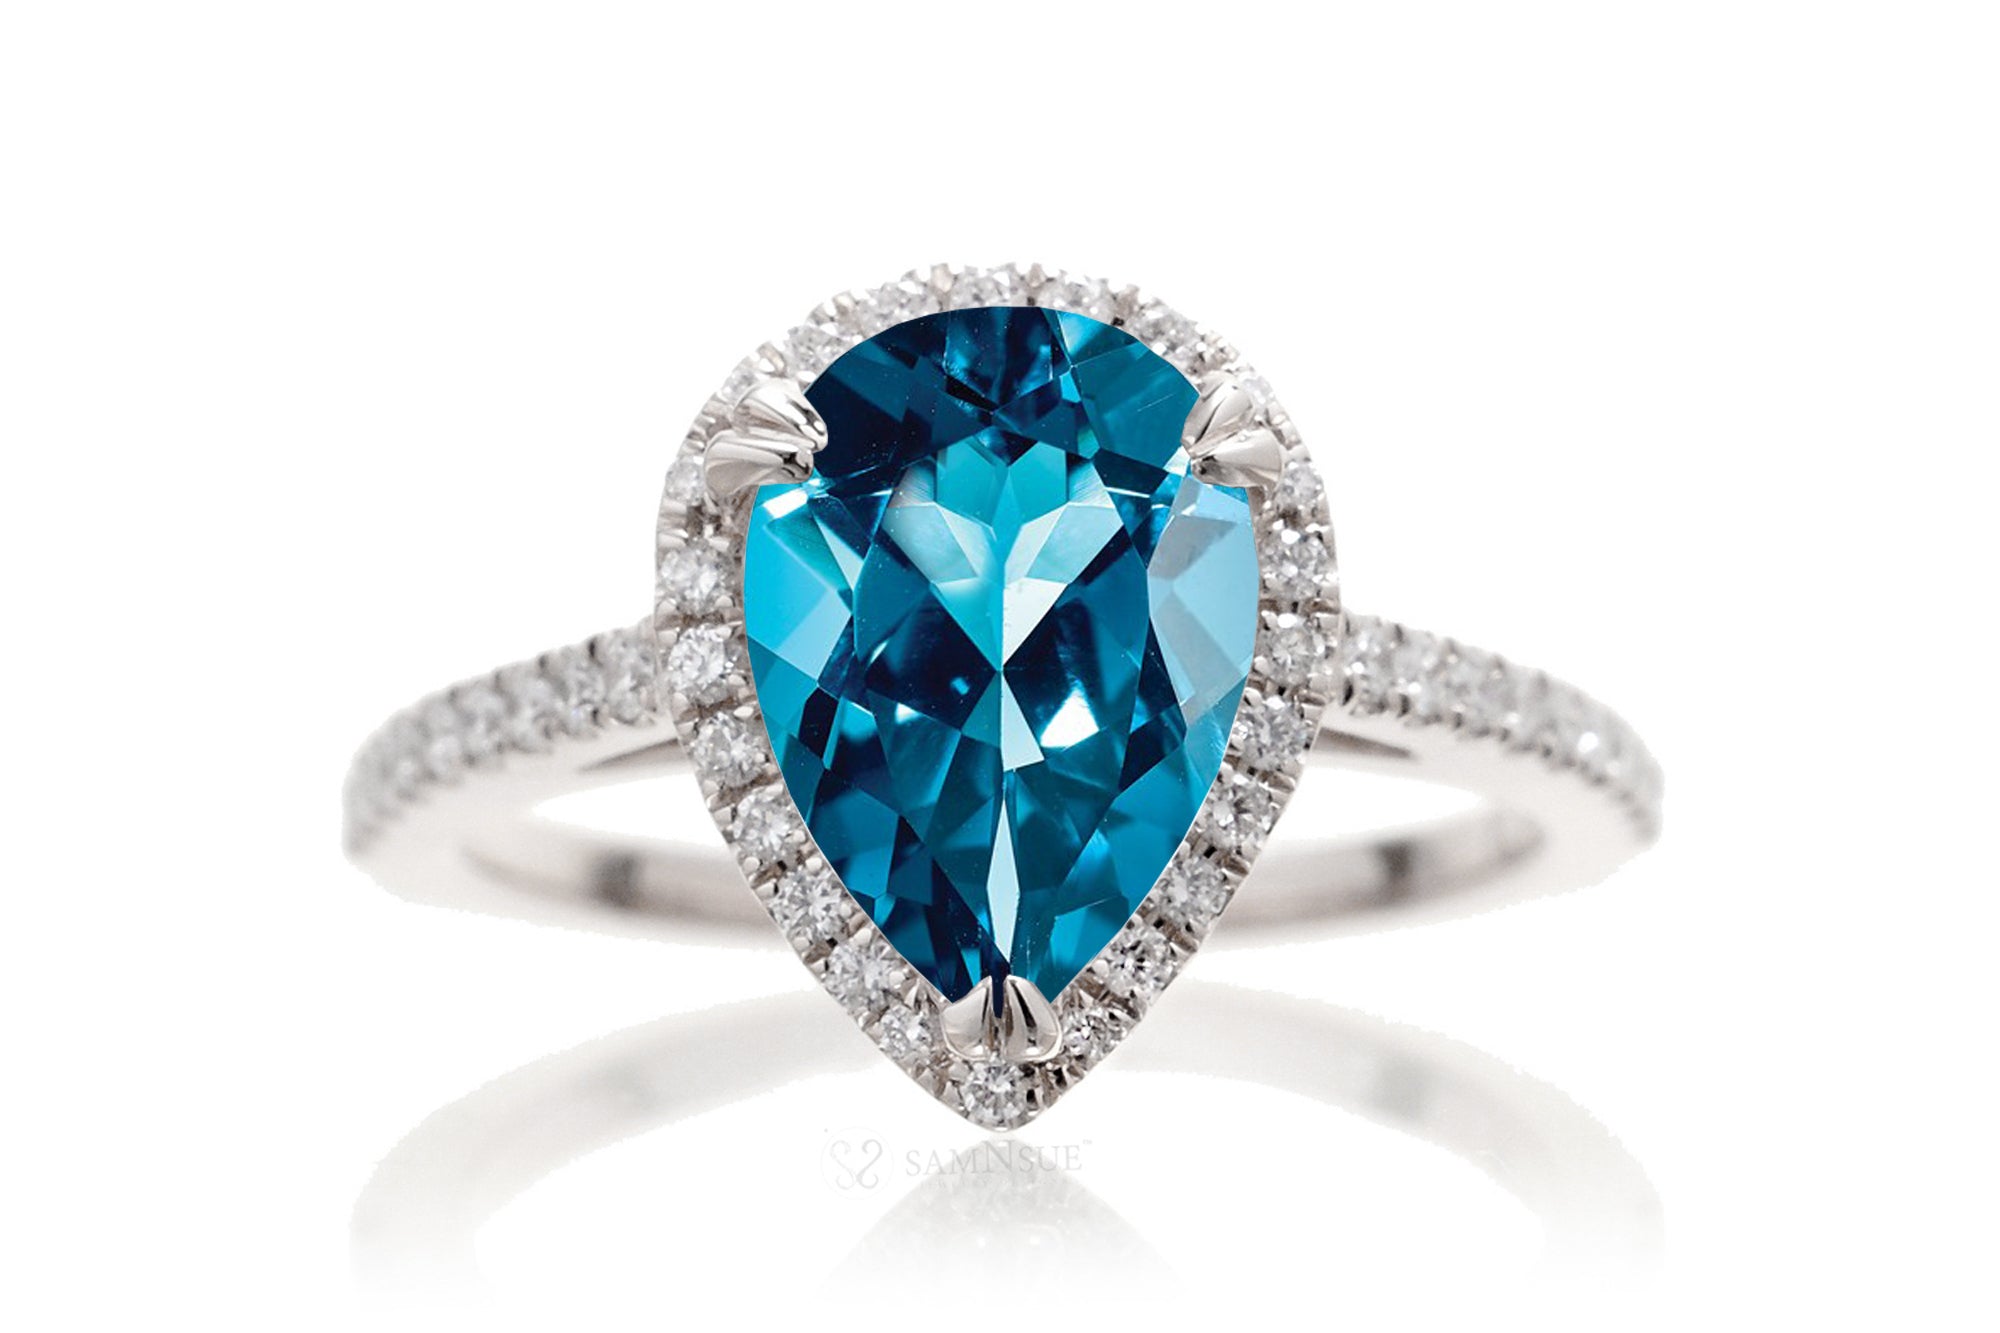 London blue topaz pear shape diamond halo engagement ring | The Signature Ring In White Gold